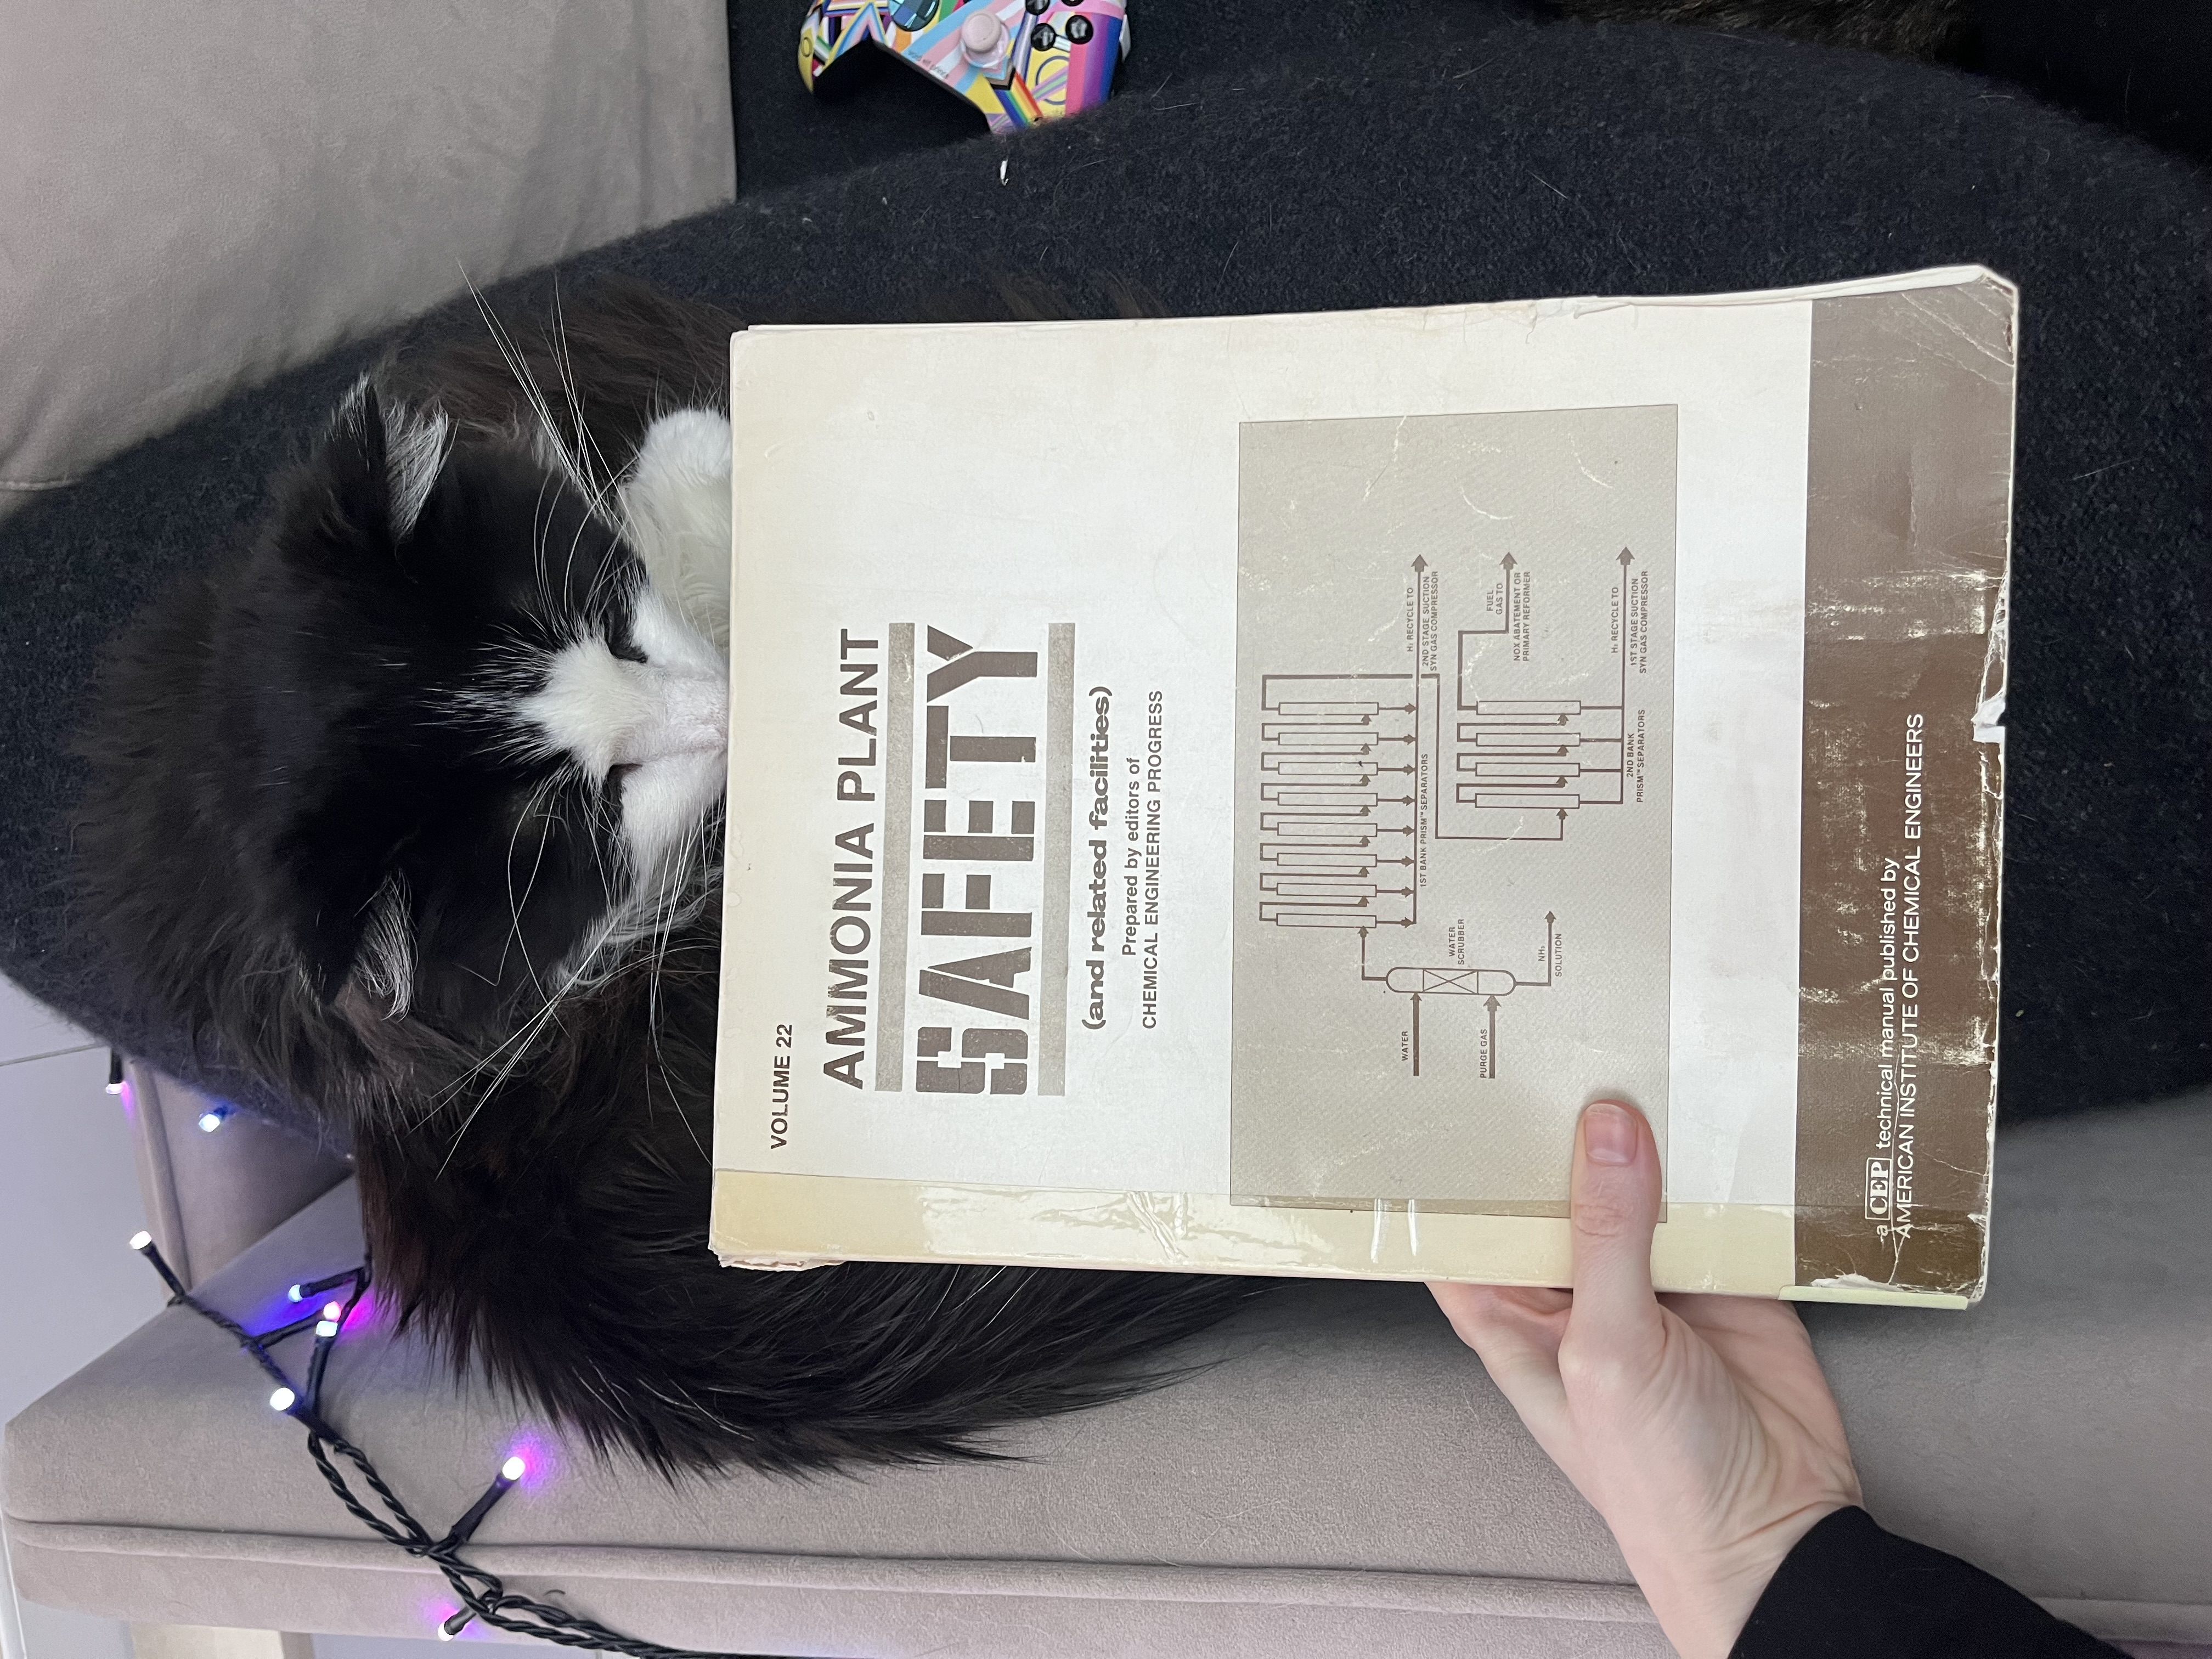 A photograph of a fluffy tuxedo cat sniffing an old, weathered copy of “Ammonia Plant Safety (and related facilities)” prepared by the editors of Chemical Engineering Progress and published by the American Institute of Chemical Engineers. Its cover is various shades of tan and beige and features an architecture diagram of a subsystem related to ammonia plants. In the background of the photograph, there are string lights in shades of pink, purple, and blue. The cat, in this case, is Chekov’s cat given he was mentioned earlier in this post.